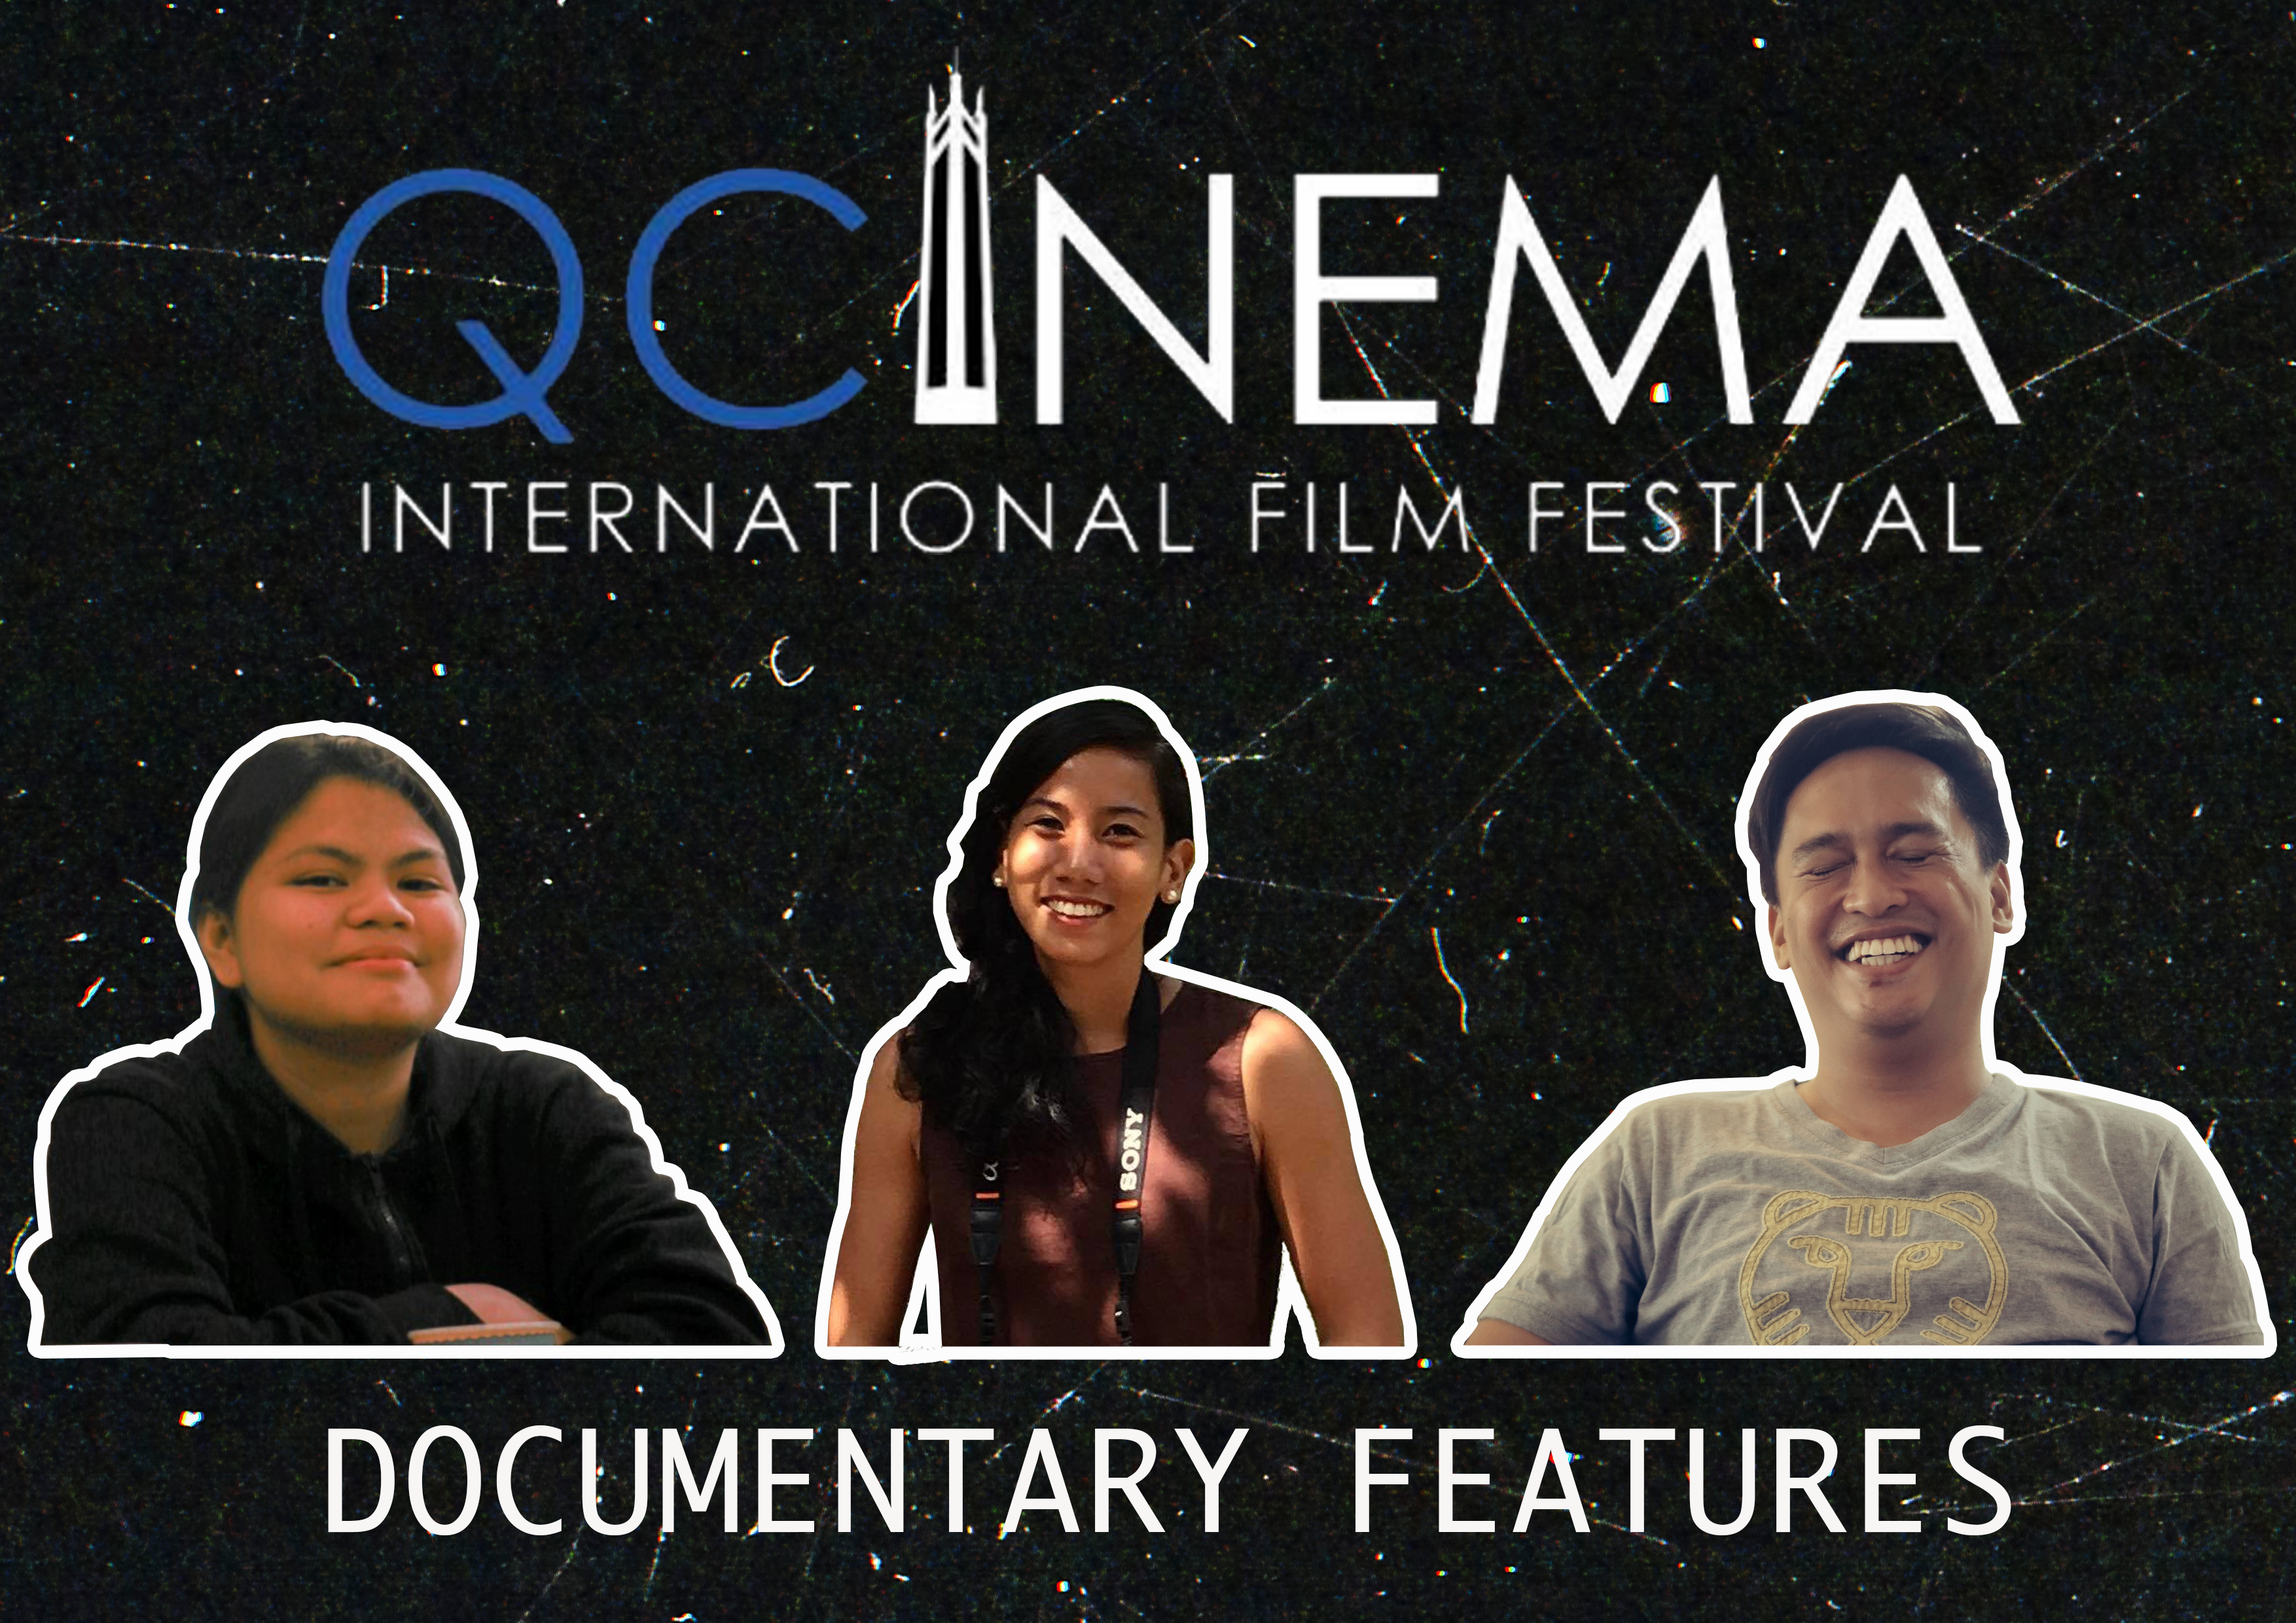 These are the three documentaries to screen in QCinema 2019